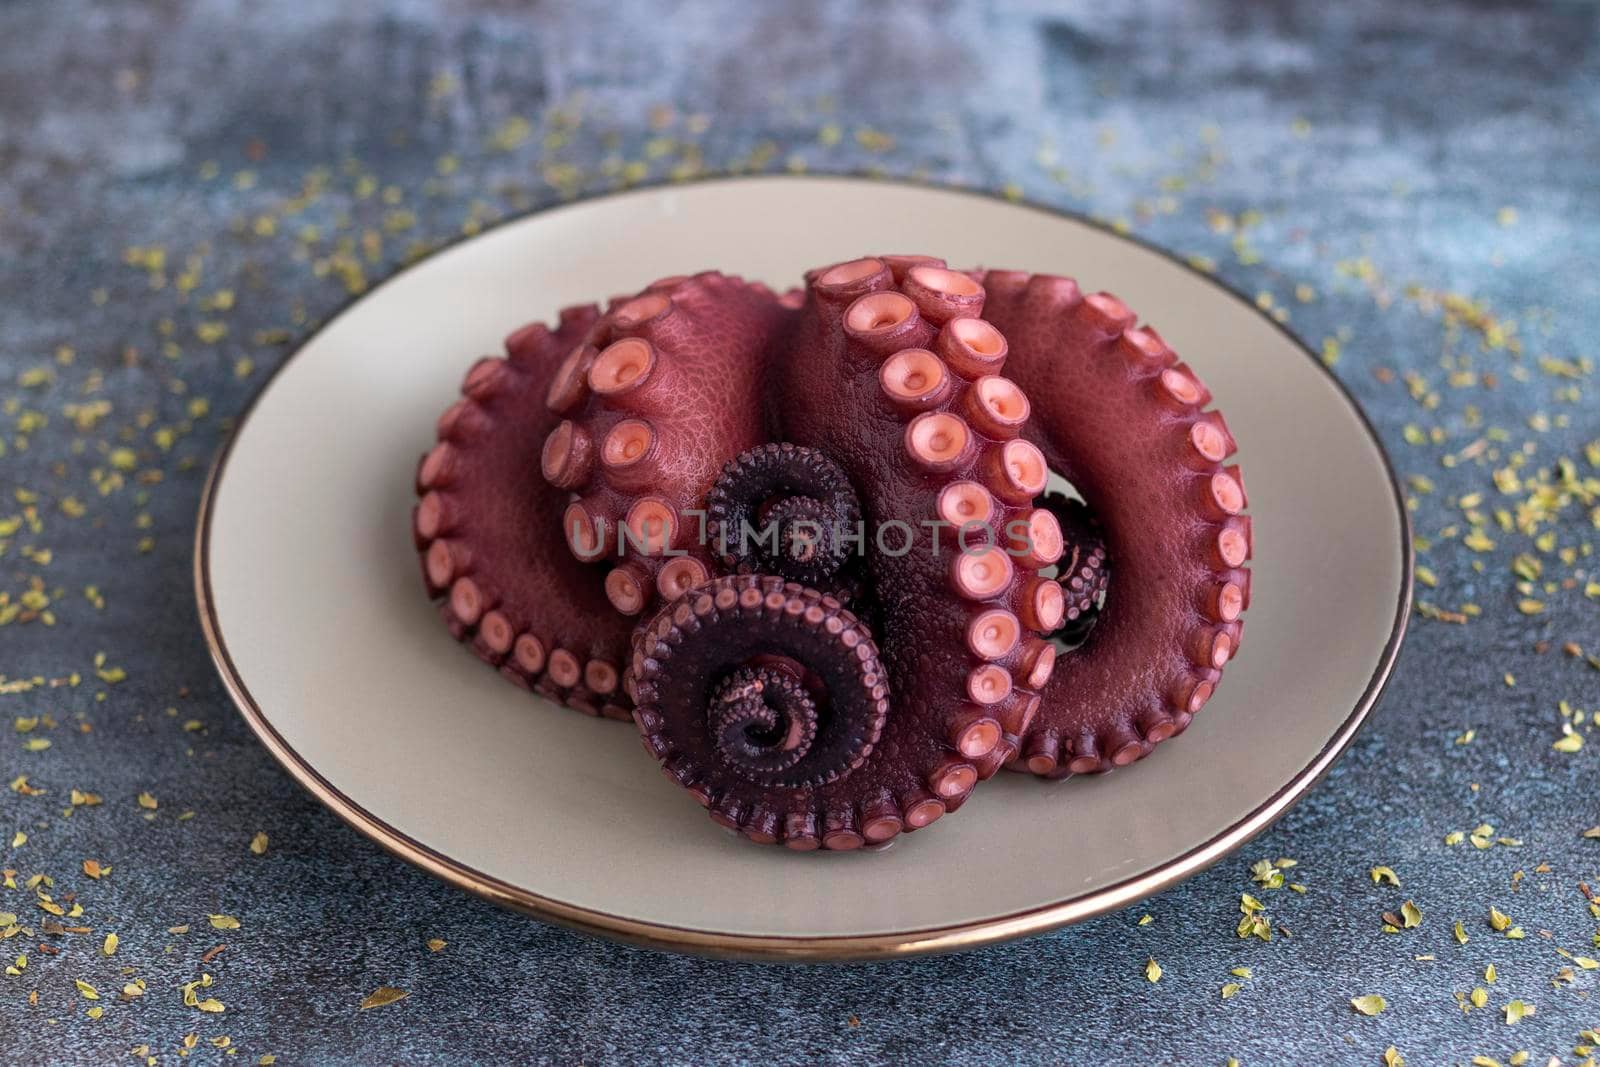 Delicious octopus tentacles served on a fine plate by eagg13